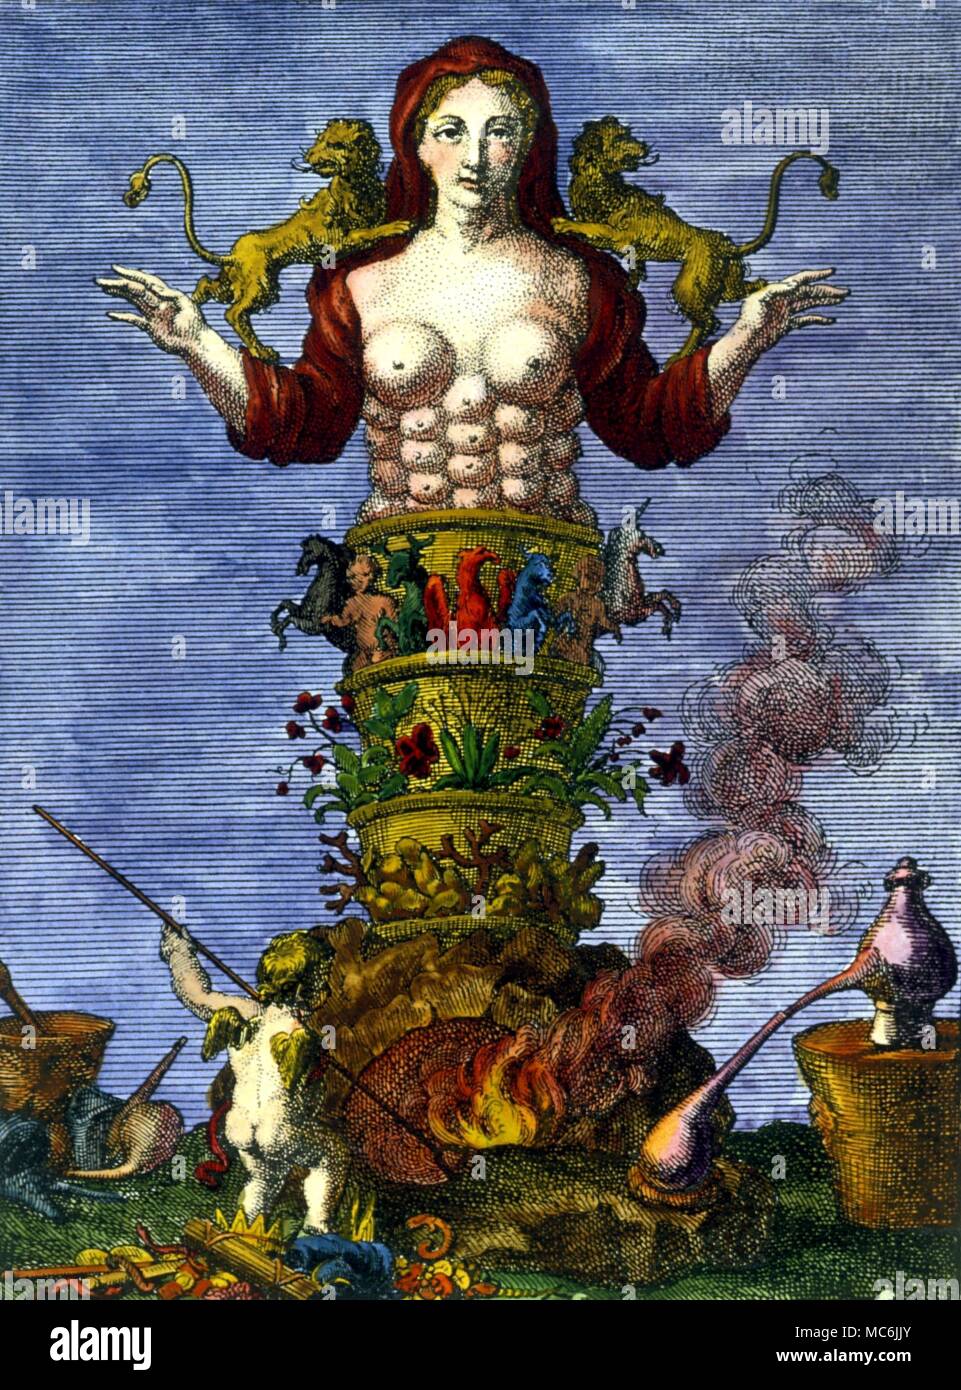 ALCHEMY - Diana of Ephesus as part of the athanor or furnace - an indication of the link between the ancients and alchemy. Coloured frontispiece from Urbanus Hierne, Actorum chymicorum homiensium, 1712 Stock Photo